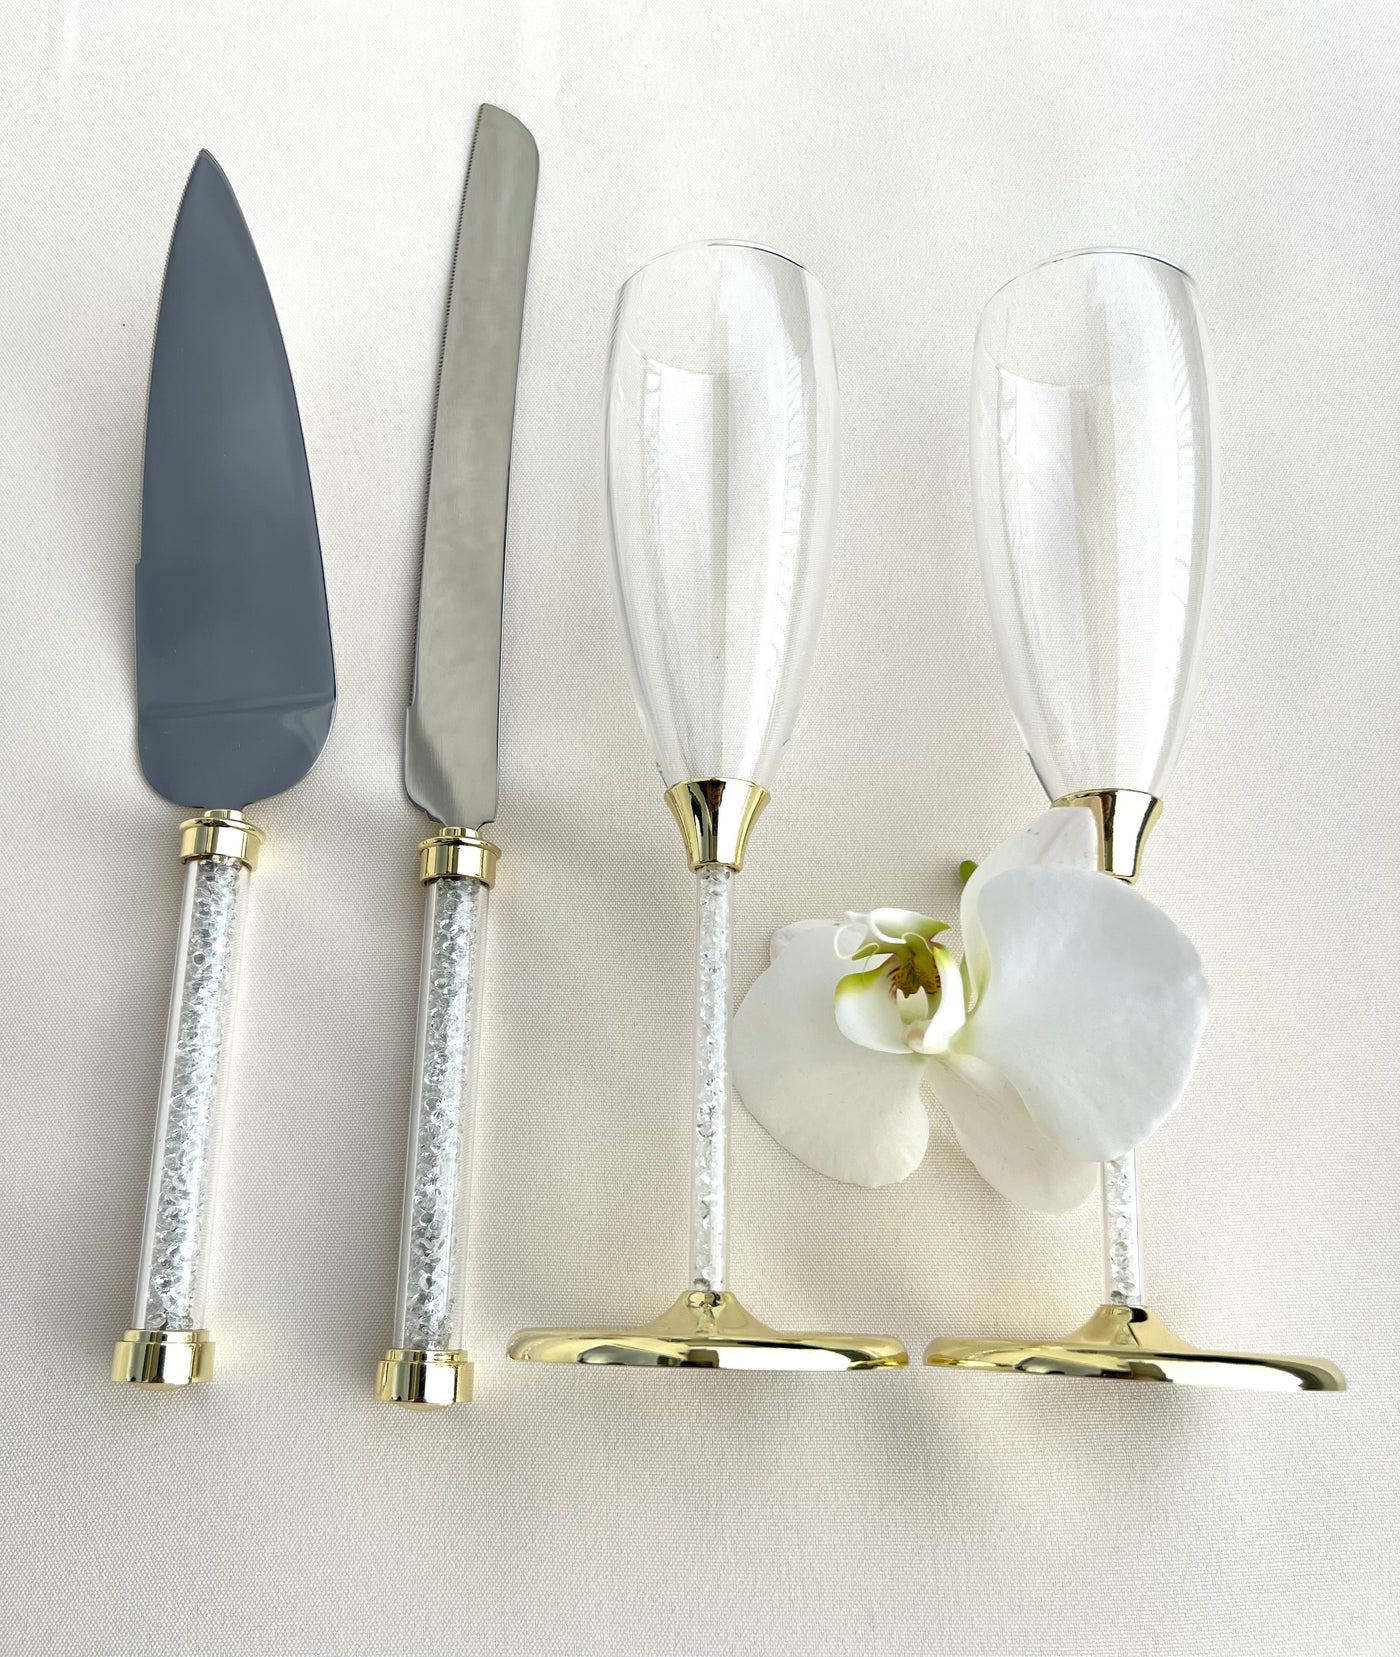 Toasting Glass Set & Cake Server, Swarovski Crystal Set for Bridal & Wedding Ceremony by Lucky Collections ™